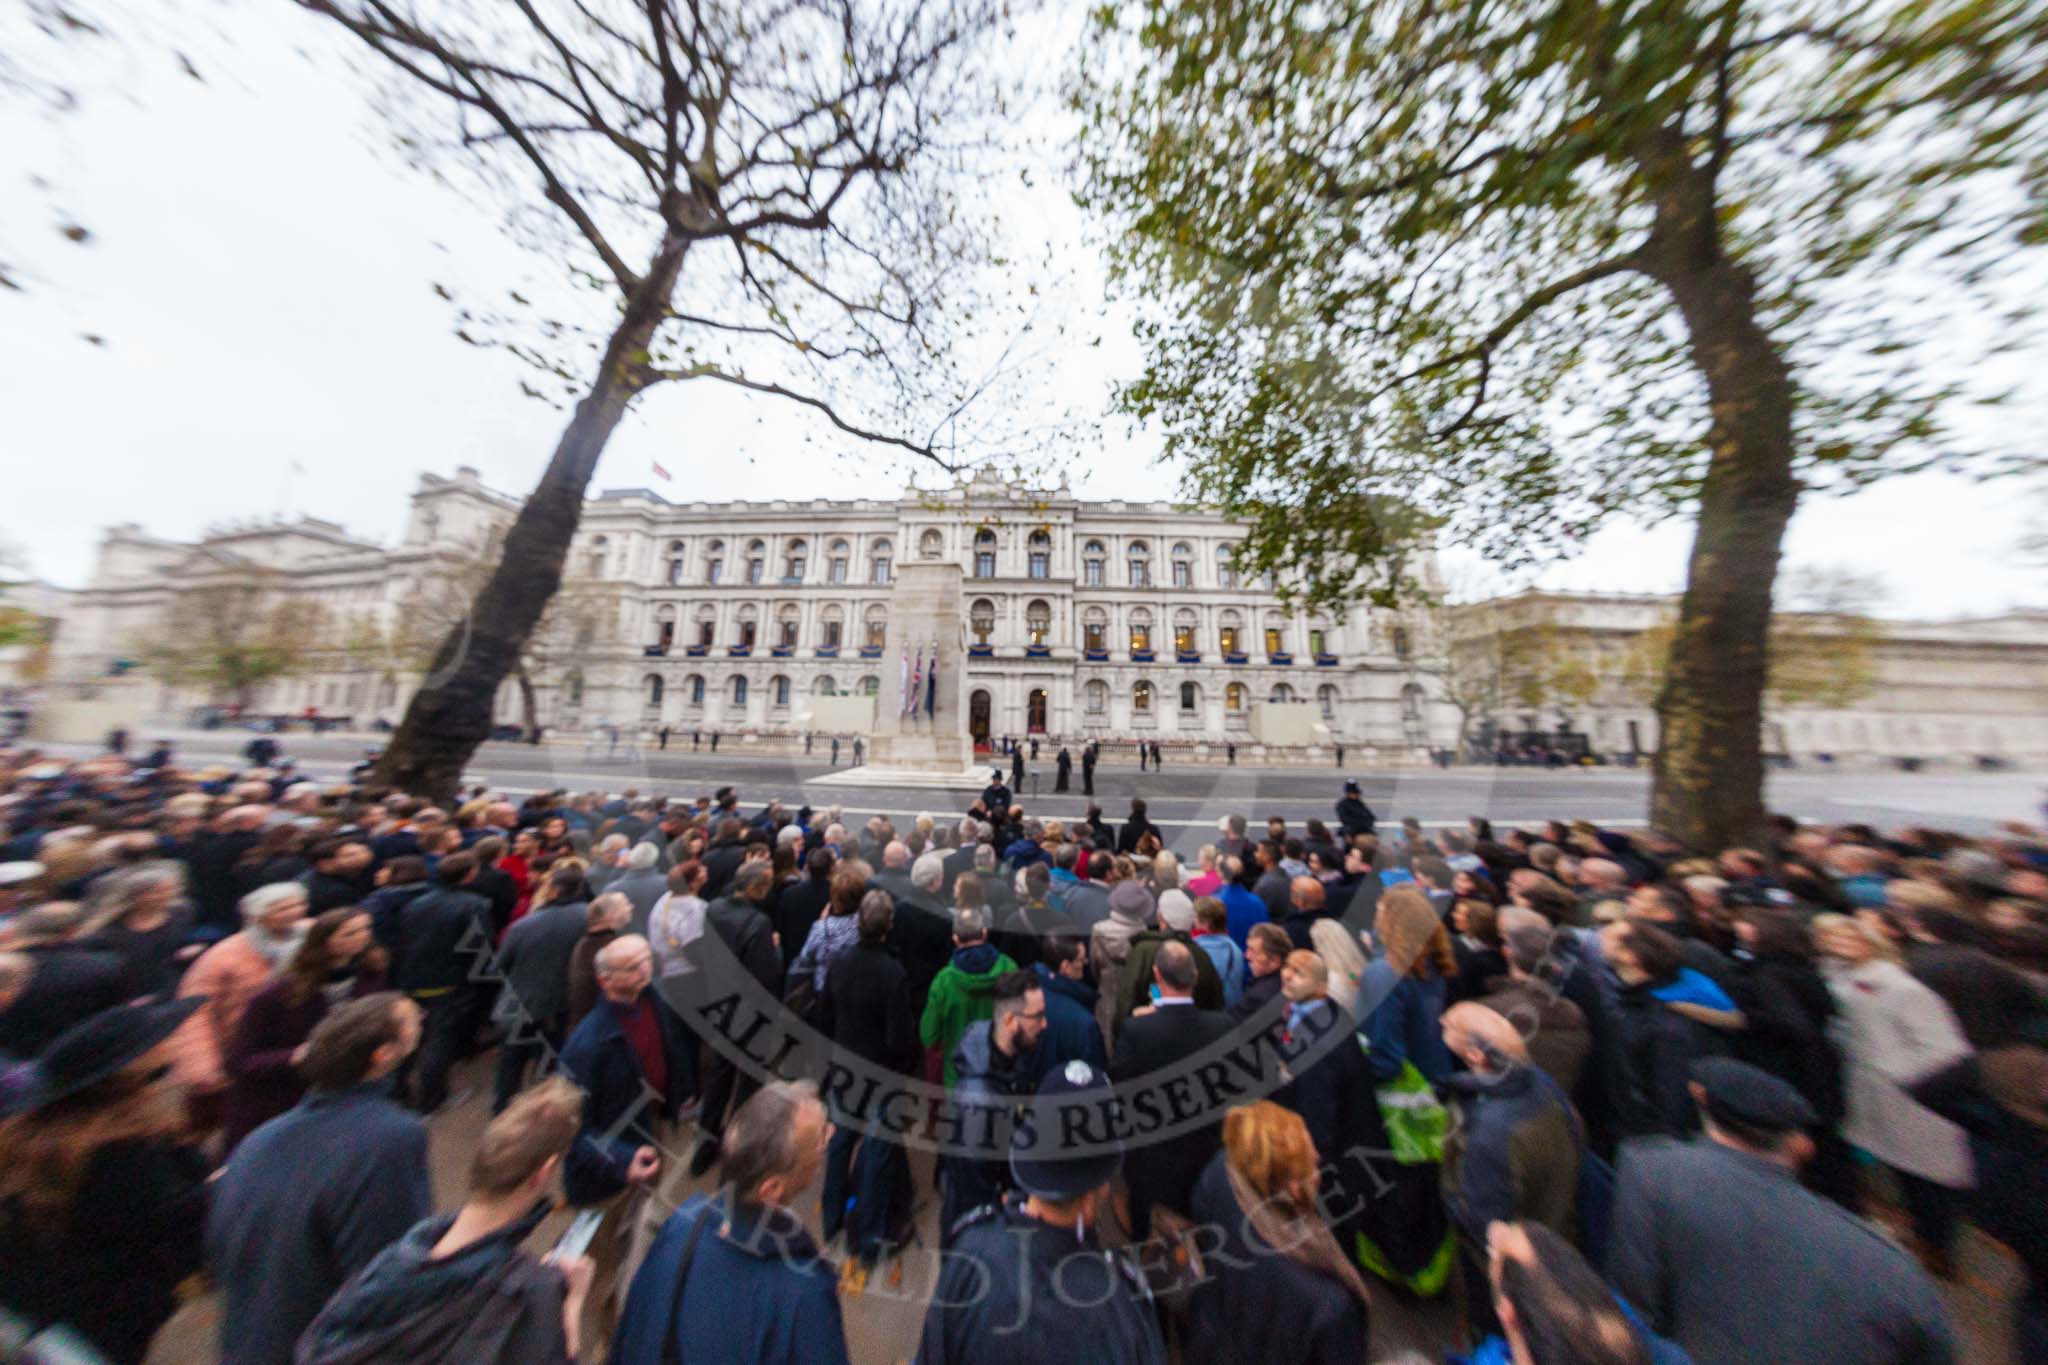 Remembrance Sunday at the Cenotaph 2015: 9am, already a crowd at the Cenotaph. Image #7, 08 November 2015 09:00 Whitehall, London, UK